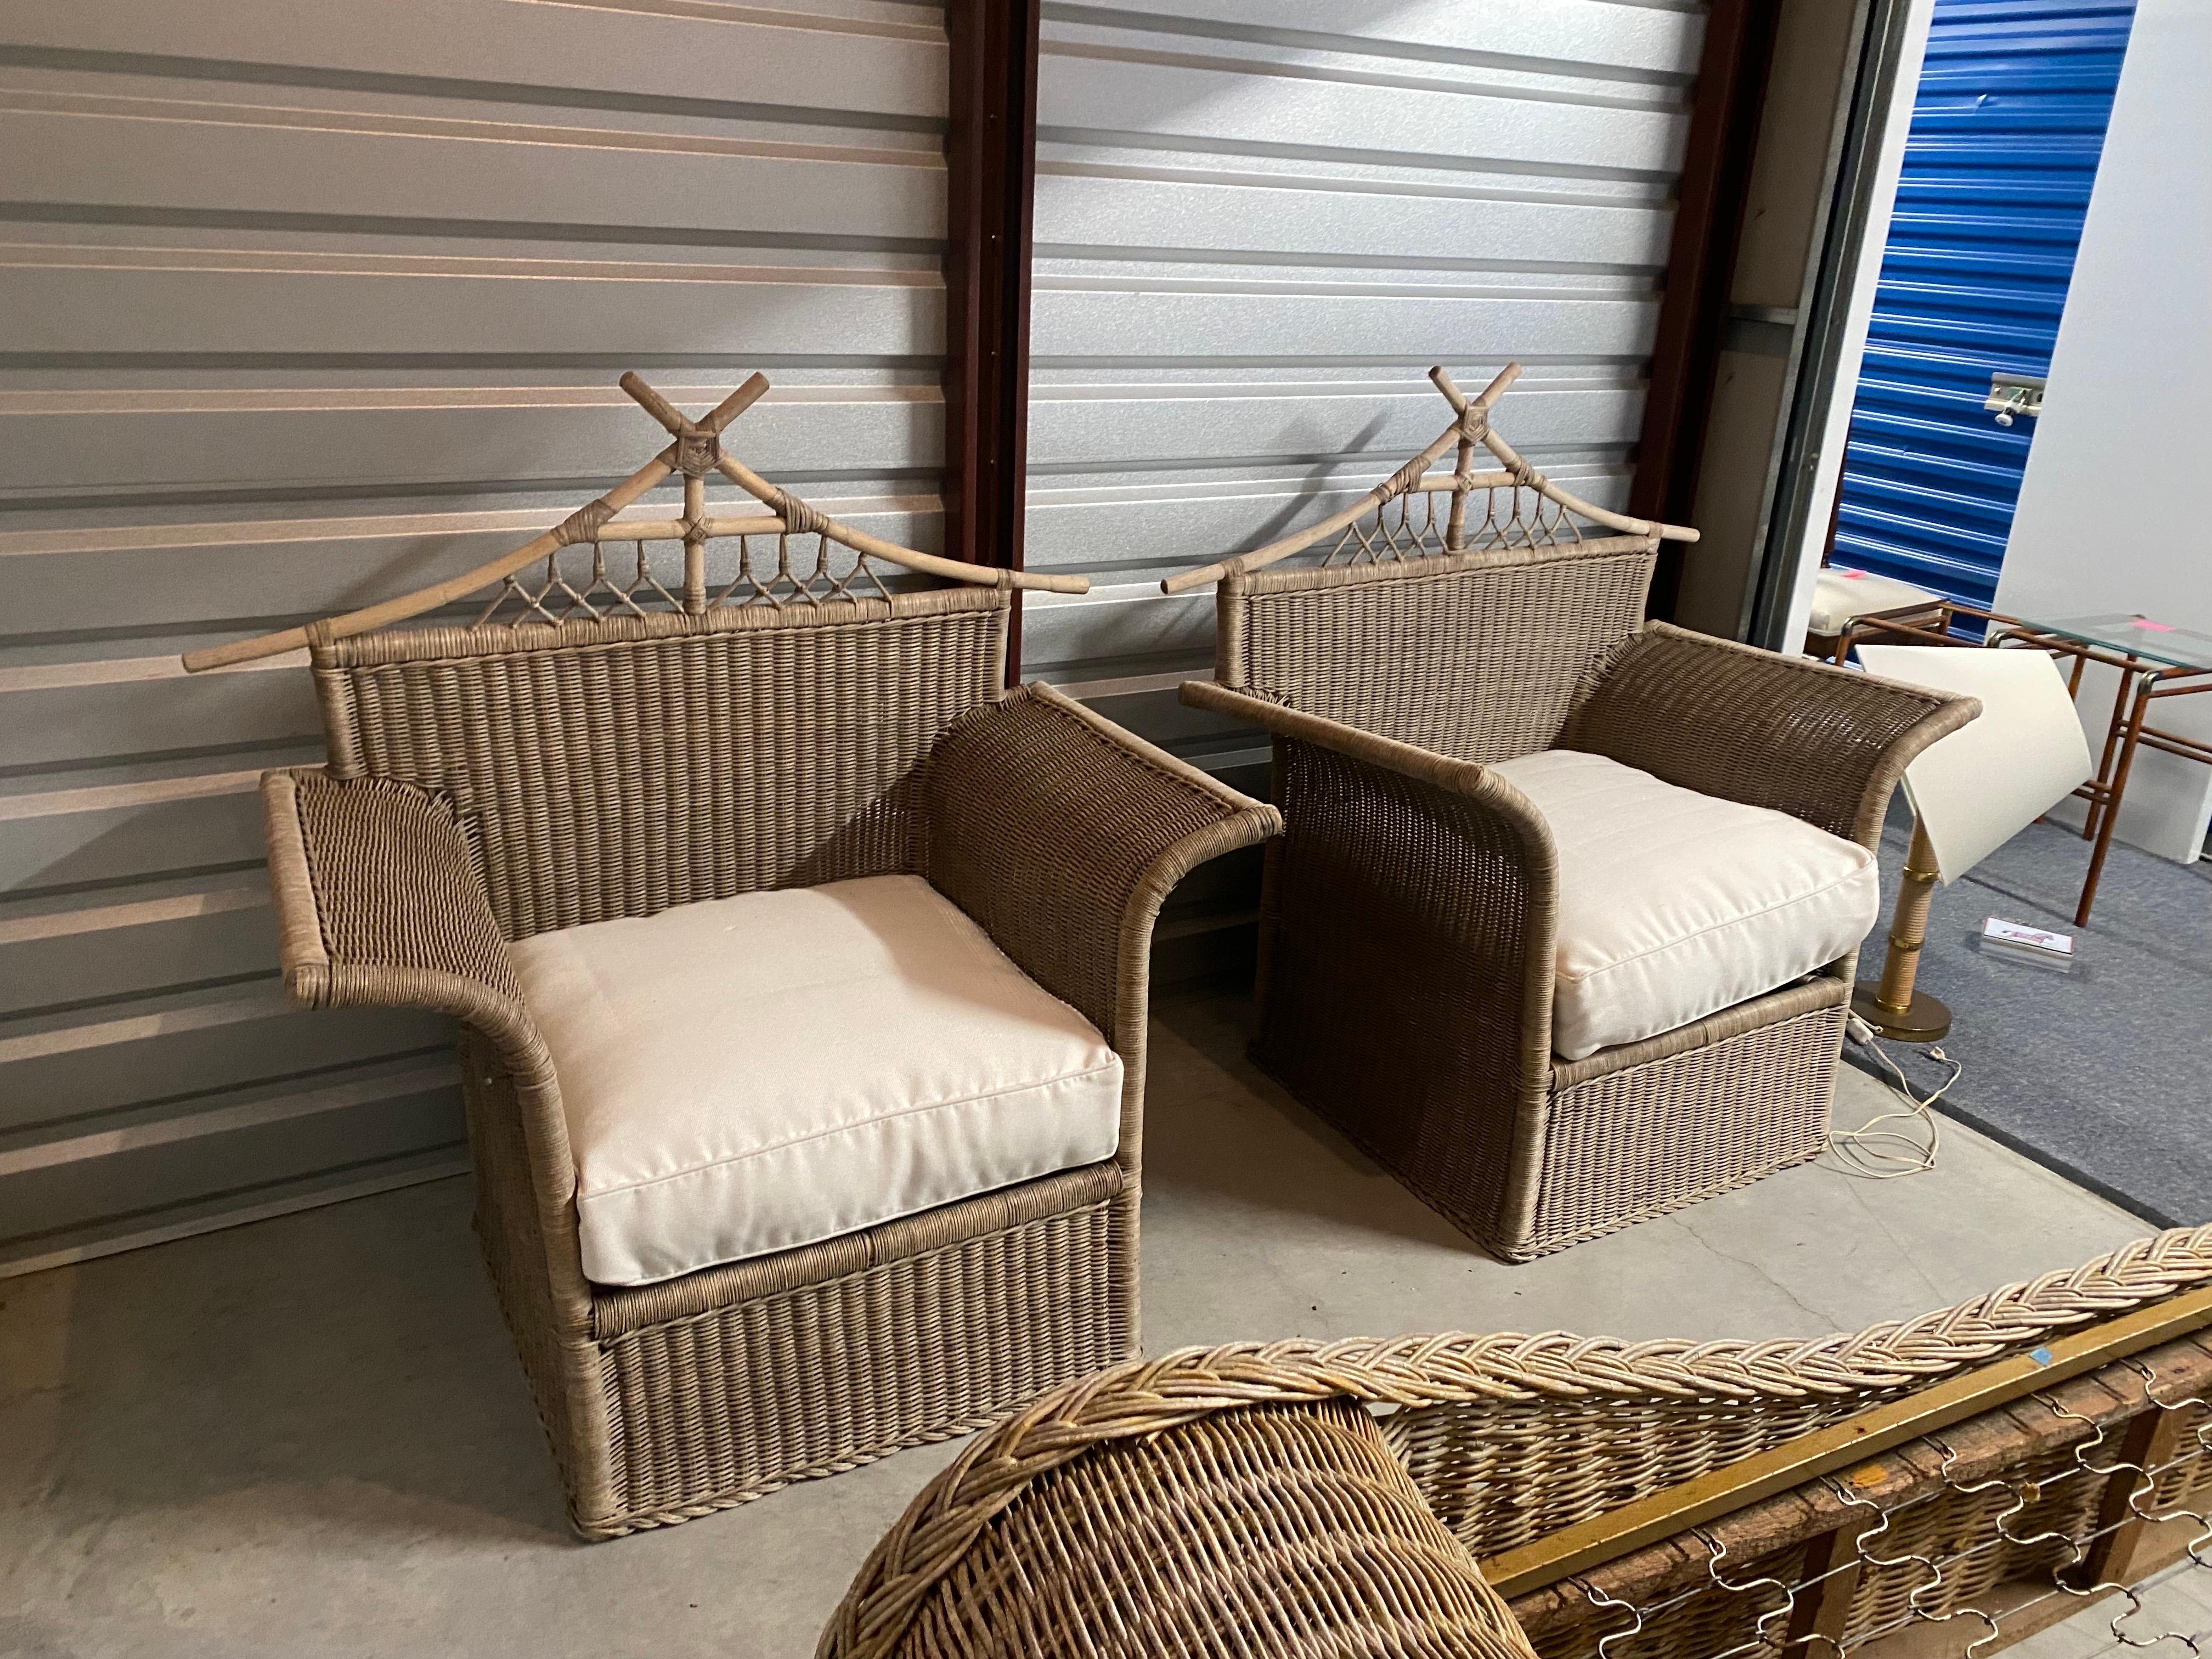 Rare Pair of Valentino Wicker Chairs, 1970s For Sale 12